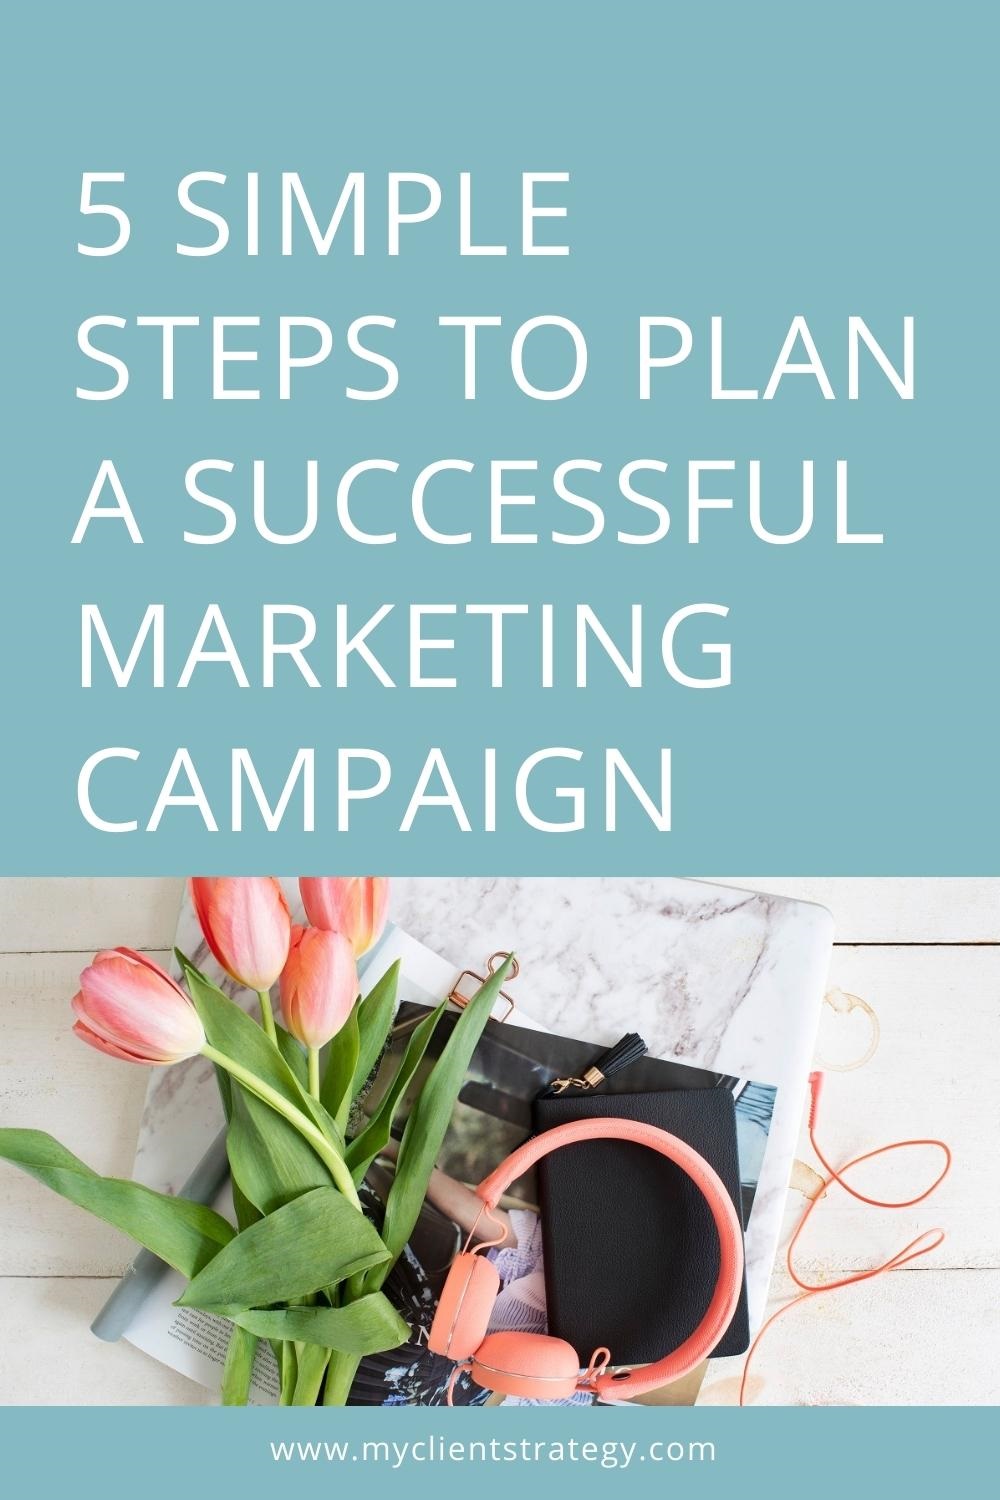 5 simple steps to plan a successful marketing campaign